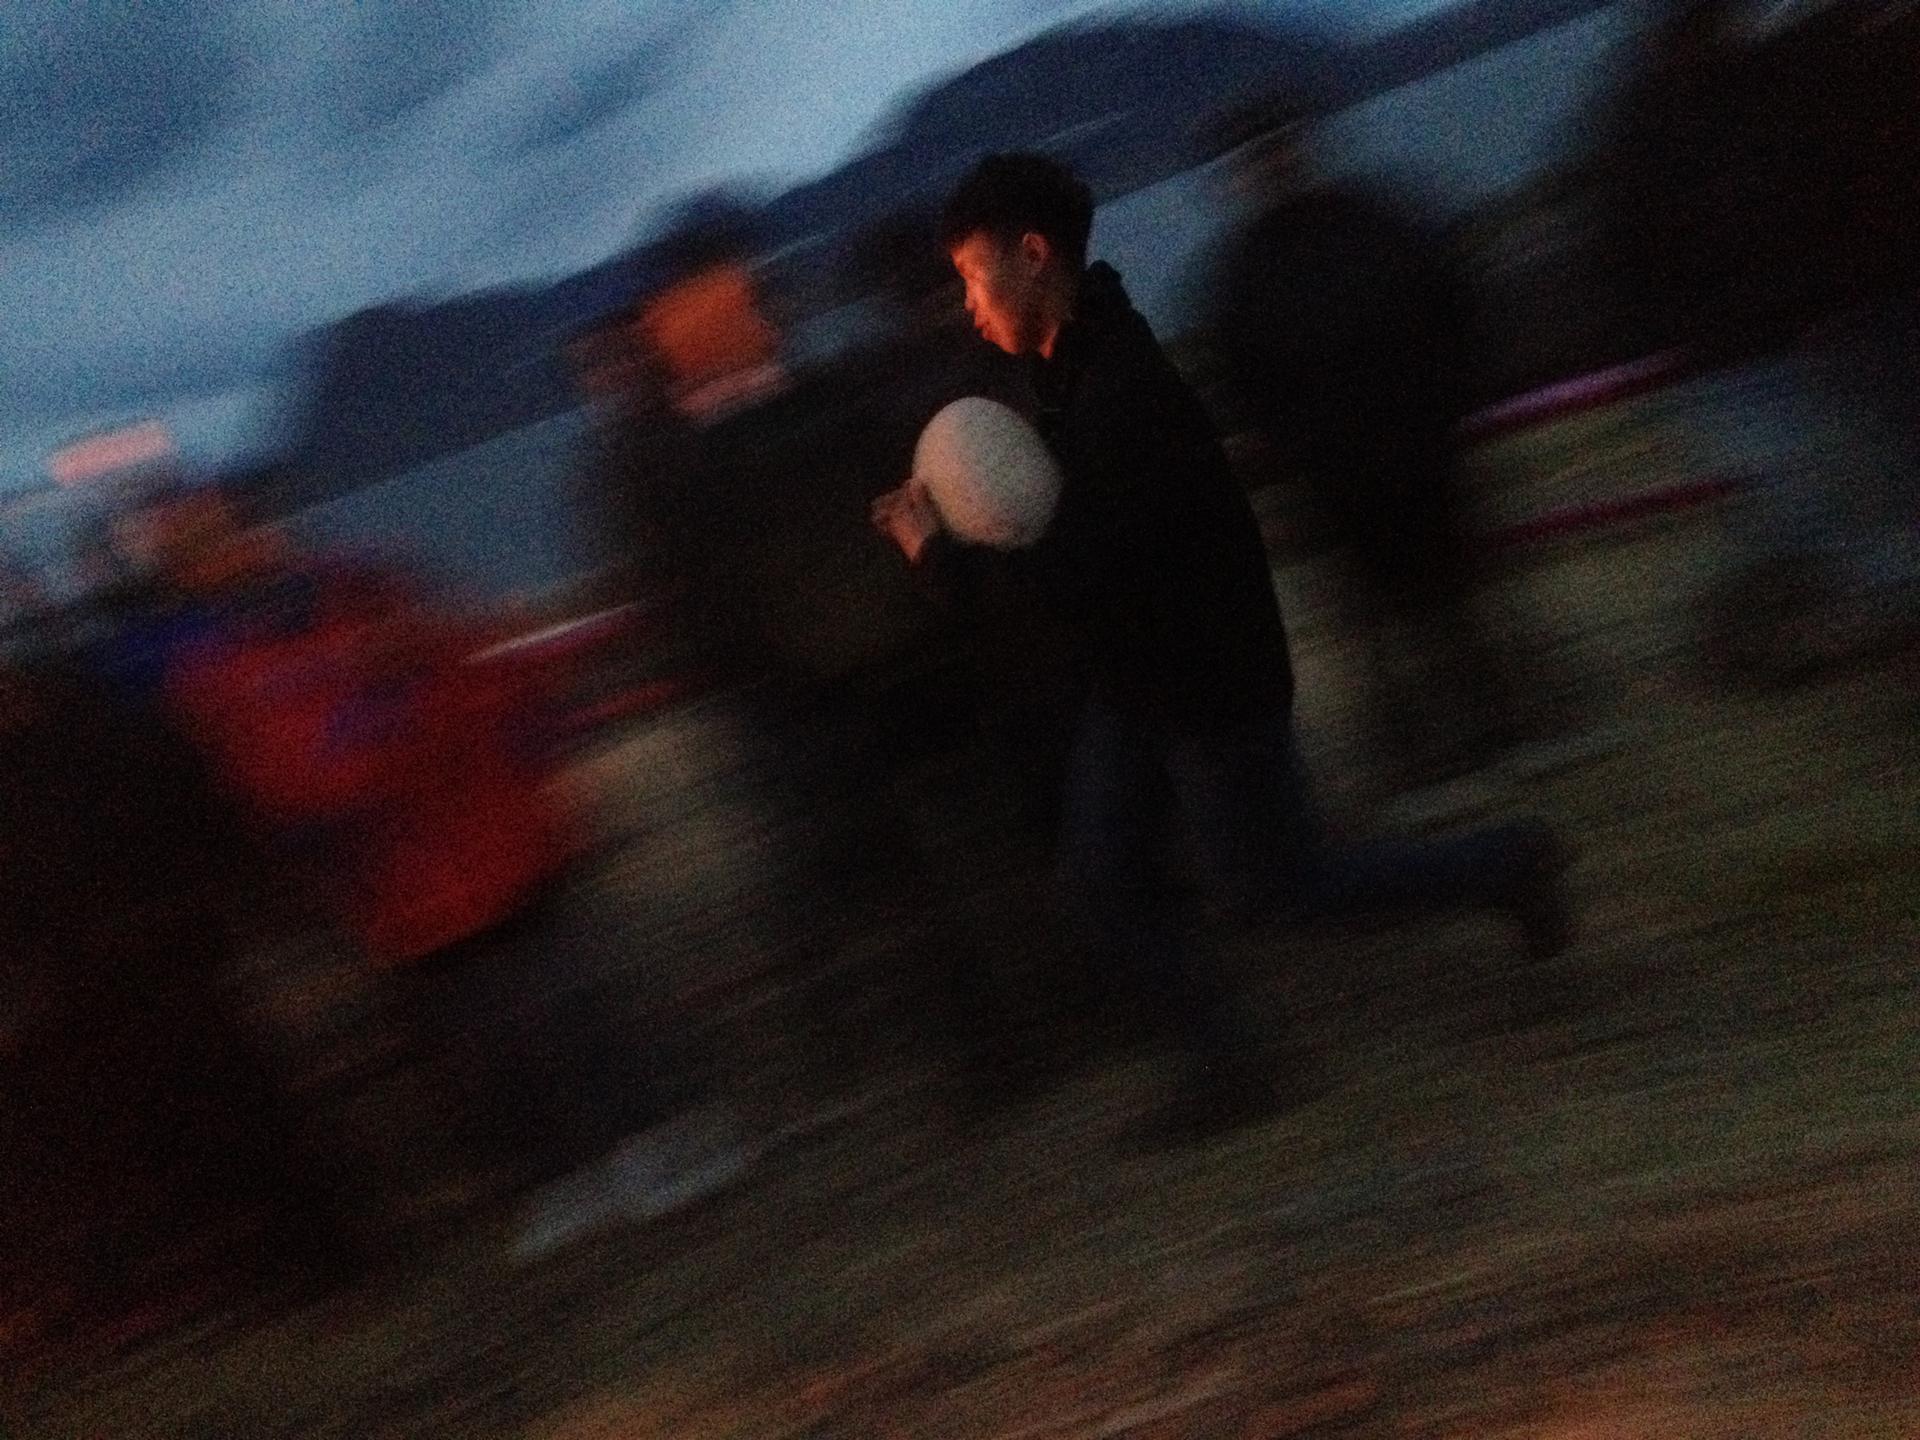 A local boy takes part in the games after dark on the final night of the gathering and celebration.